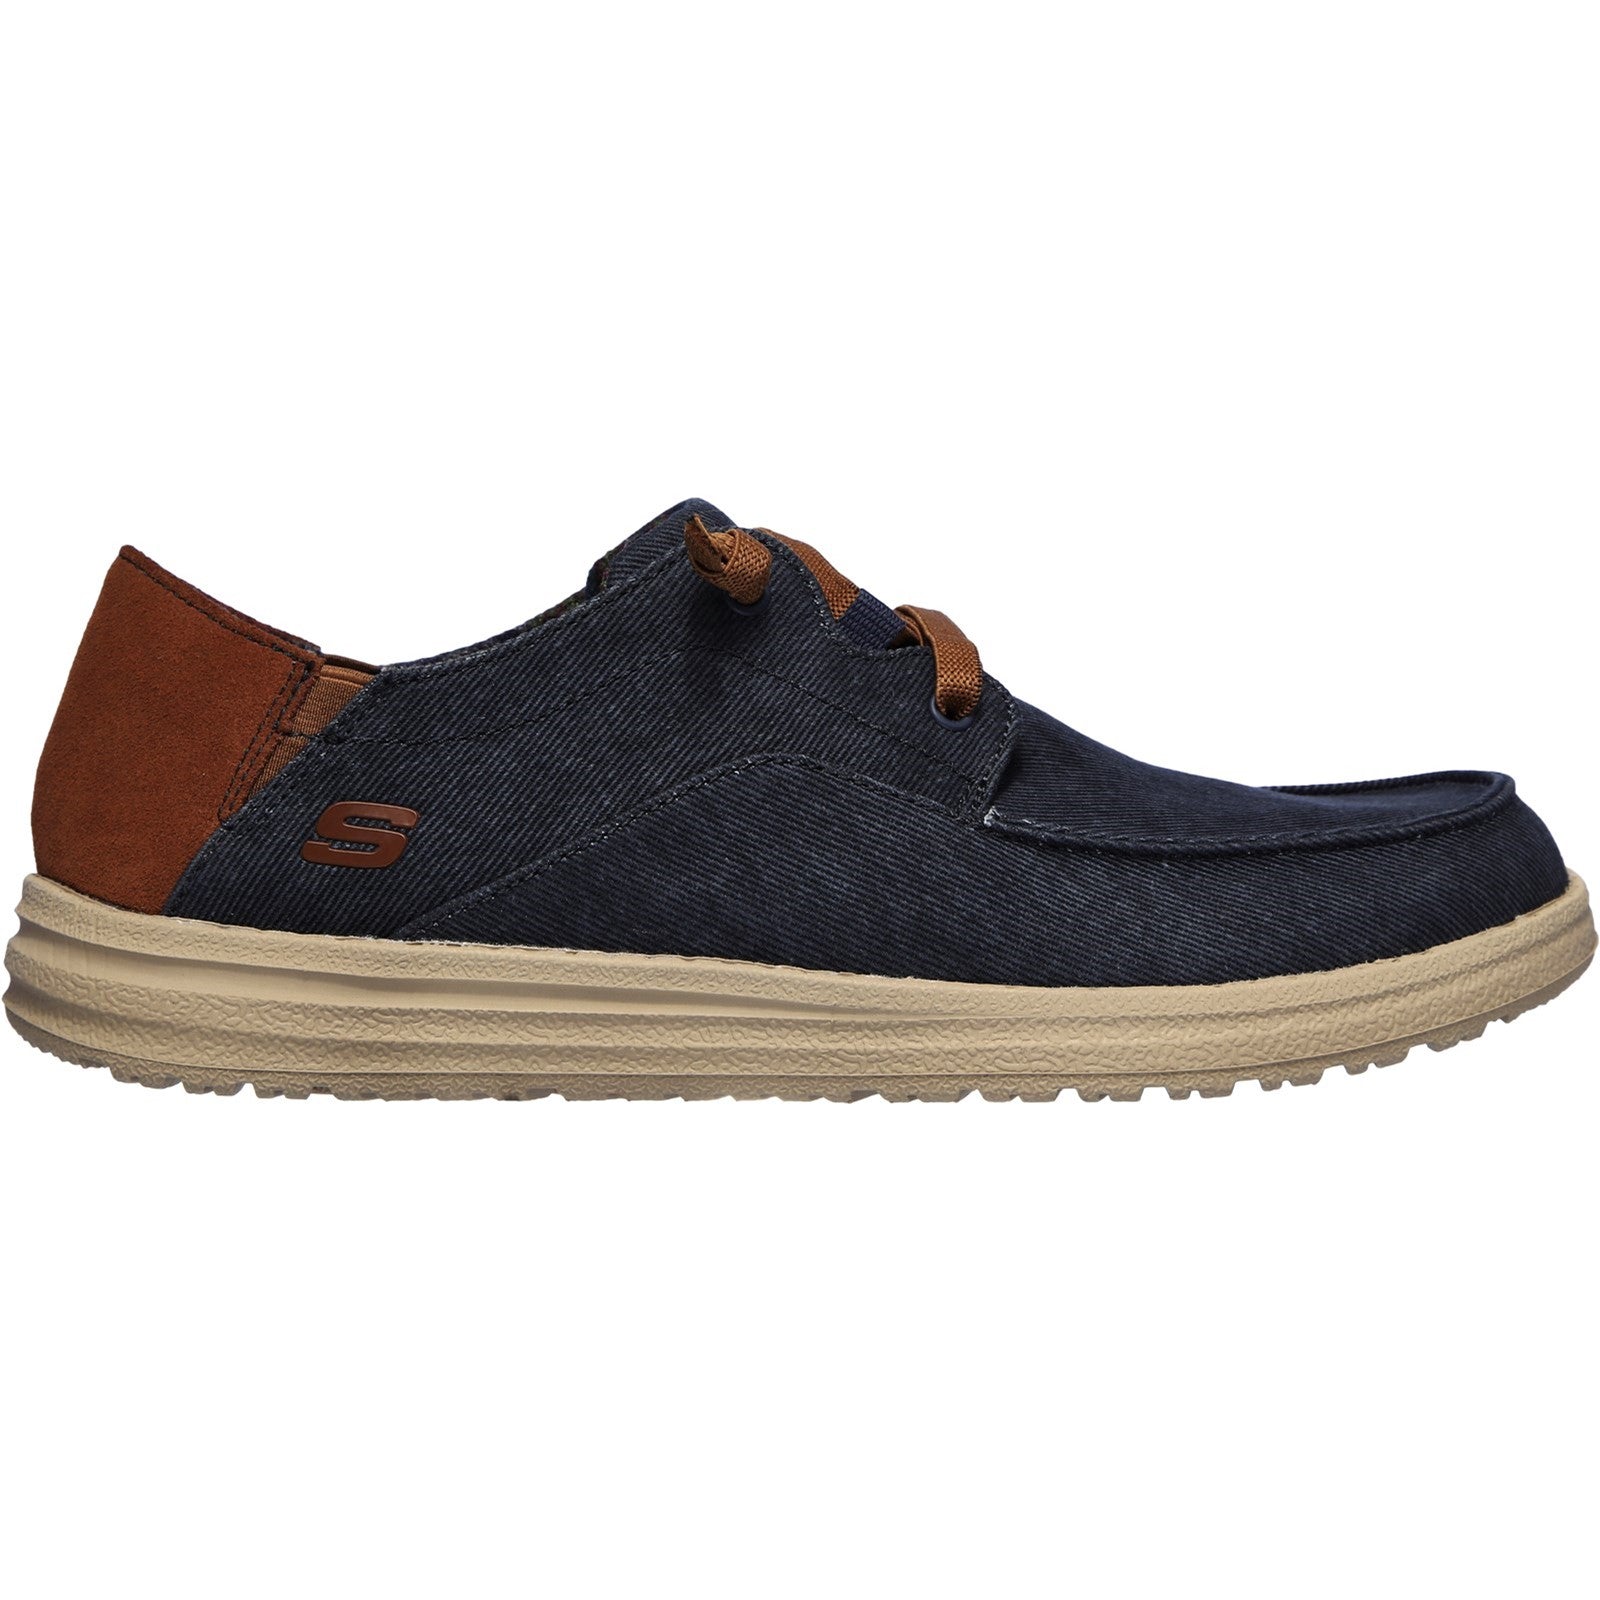 Skechers Mens Melson Planon Trainers - Navy